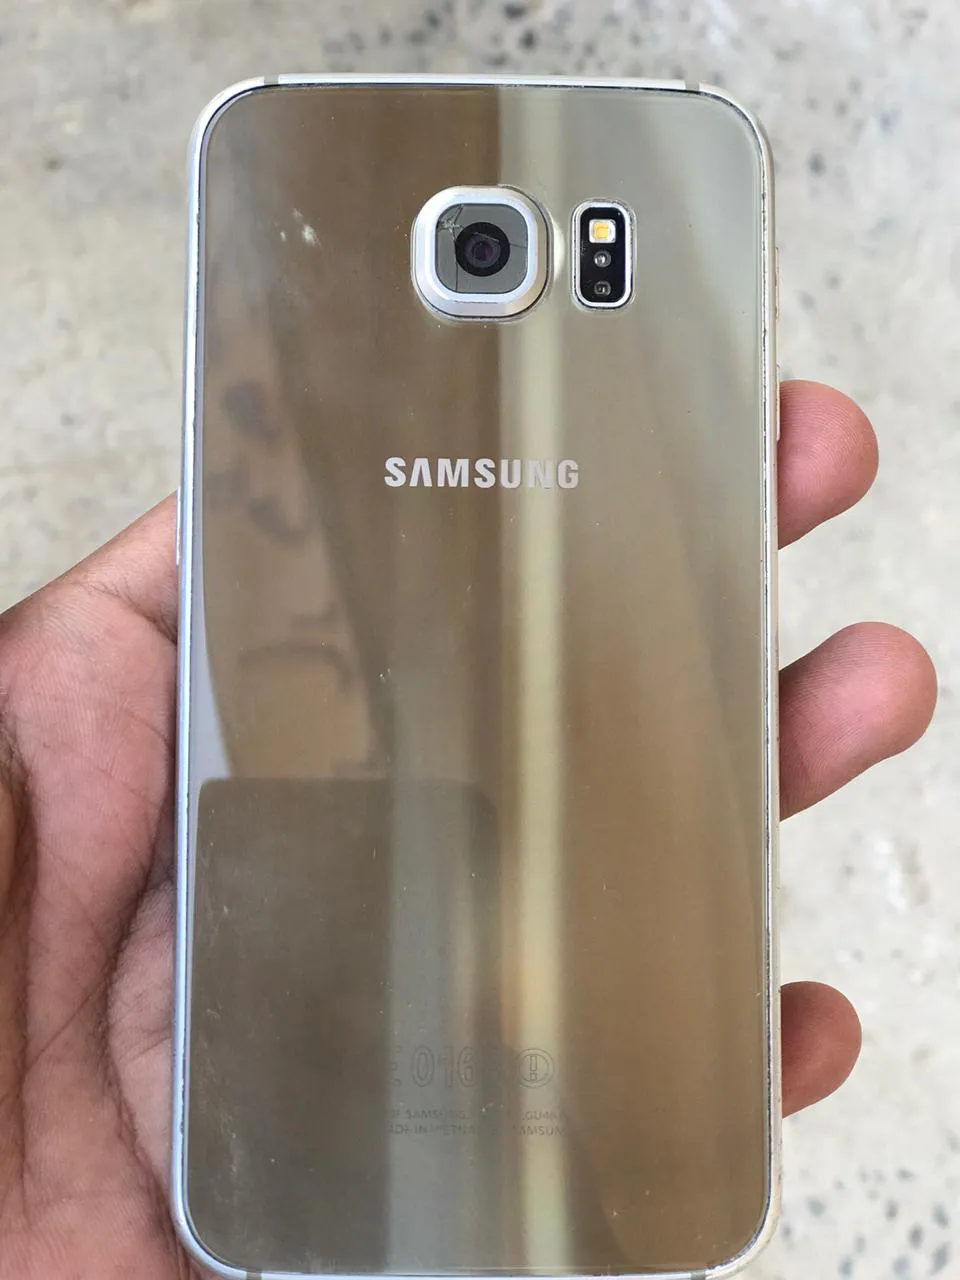 Samsung Galaxy s6 for sale in pakistan - photo 1